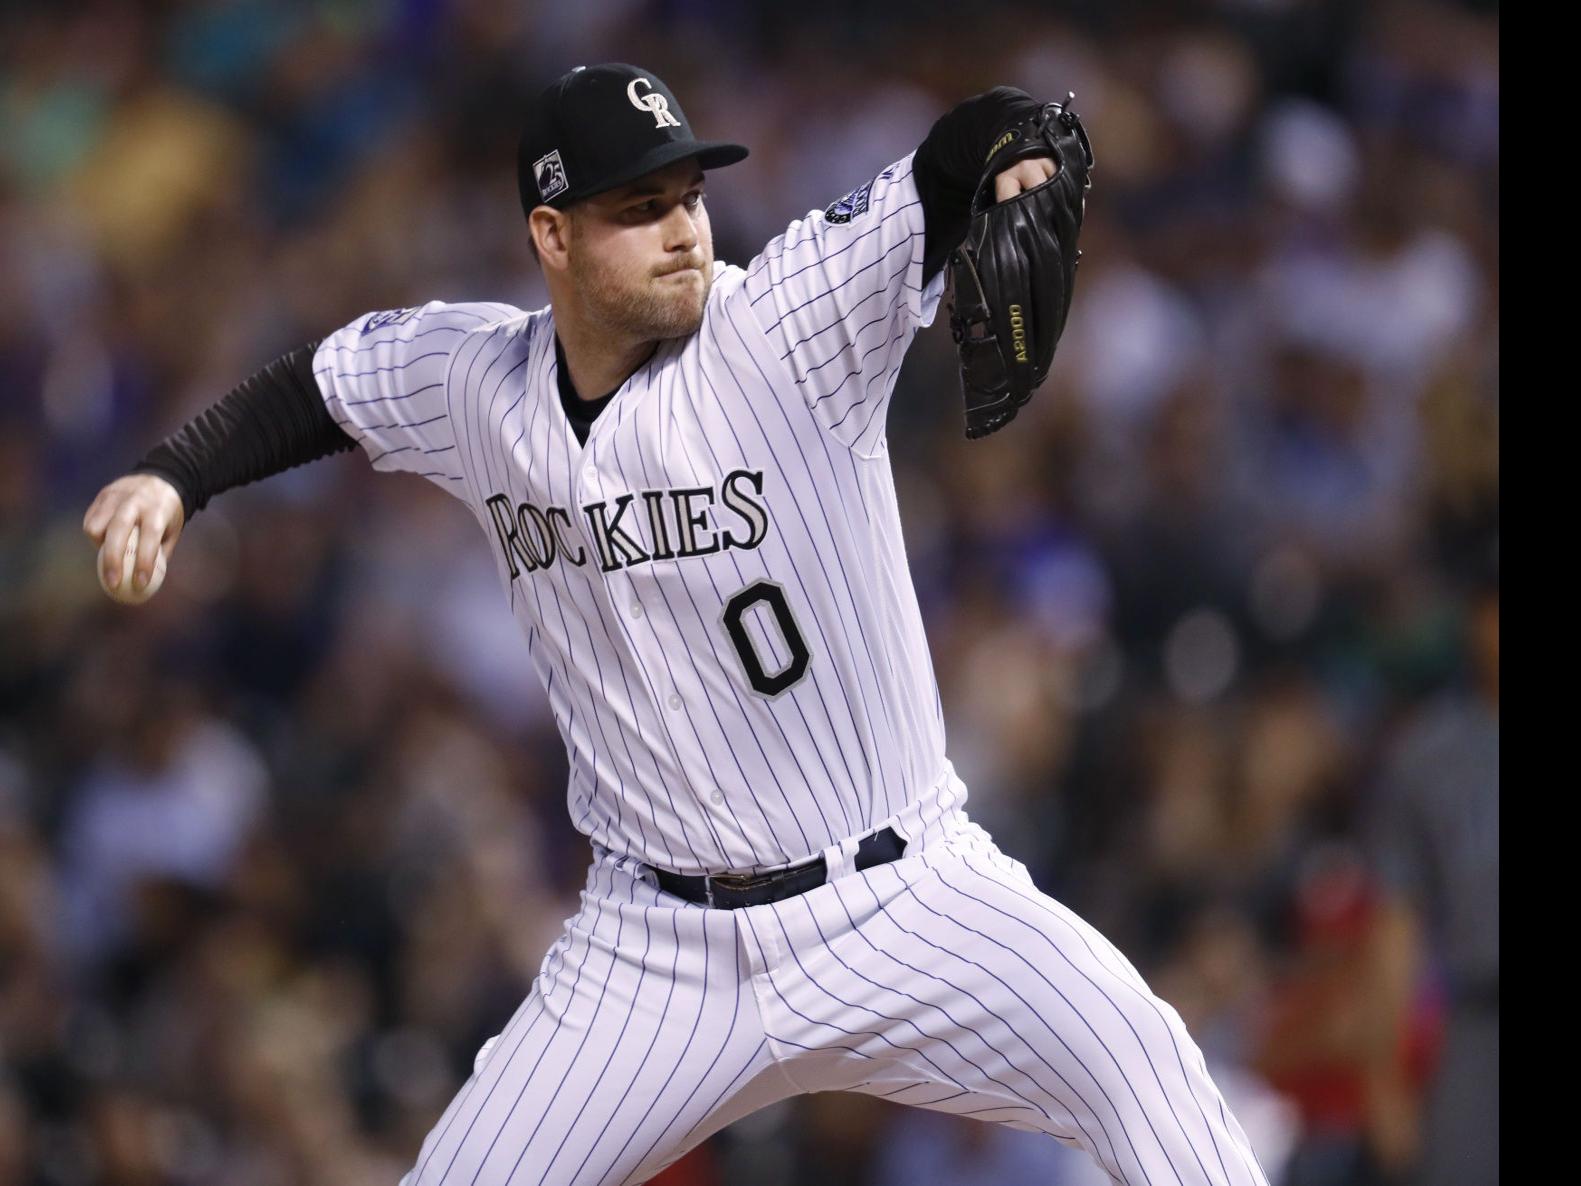 Rockies reliever Adam Ottavino wears No. 0 -- which other MLBers donned the  digit?